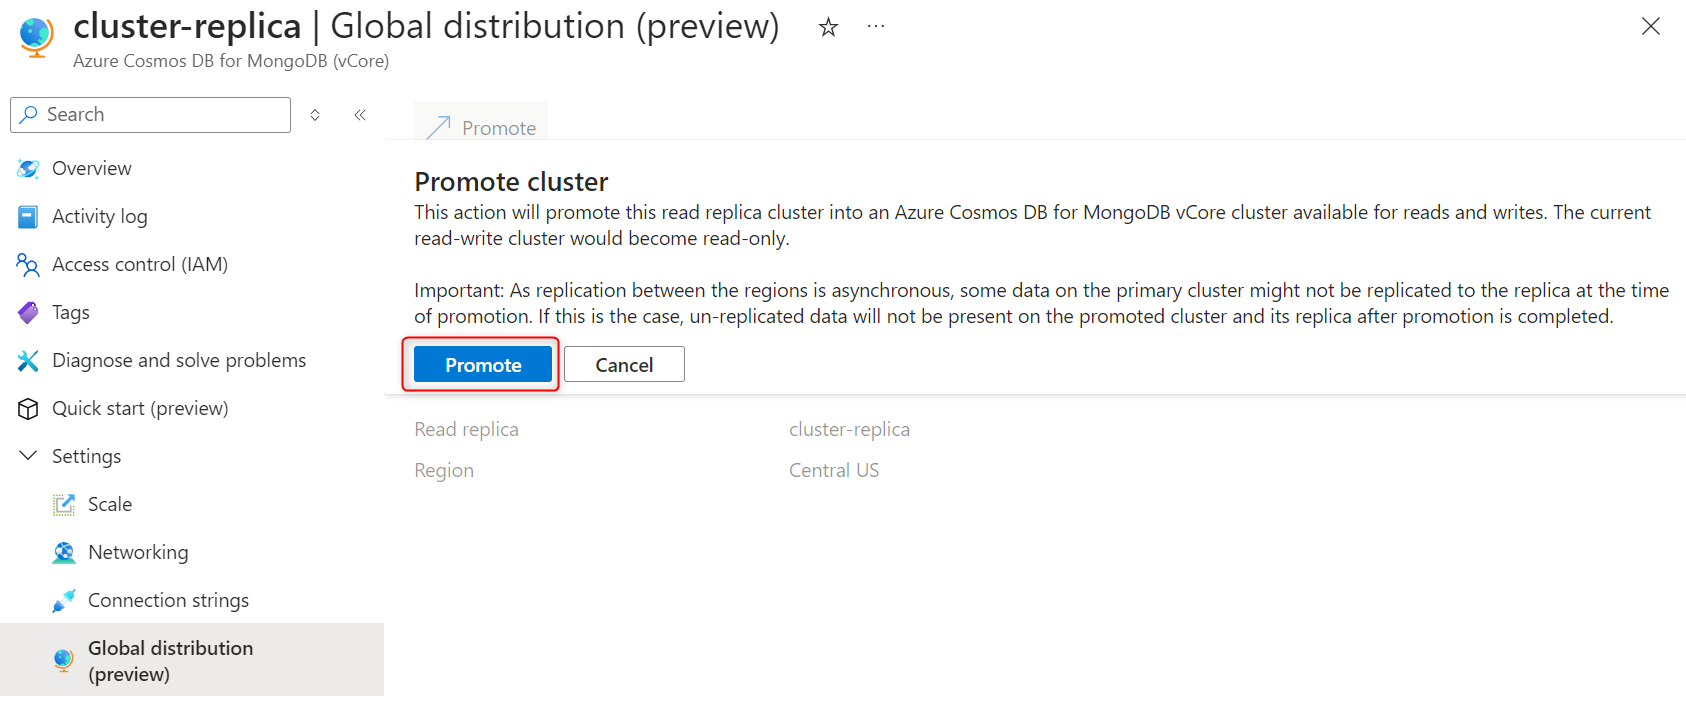 Screenshot of the read replica cluster global distribution preview page with the promote confirmation pop-up window.